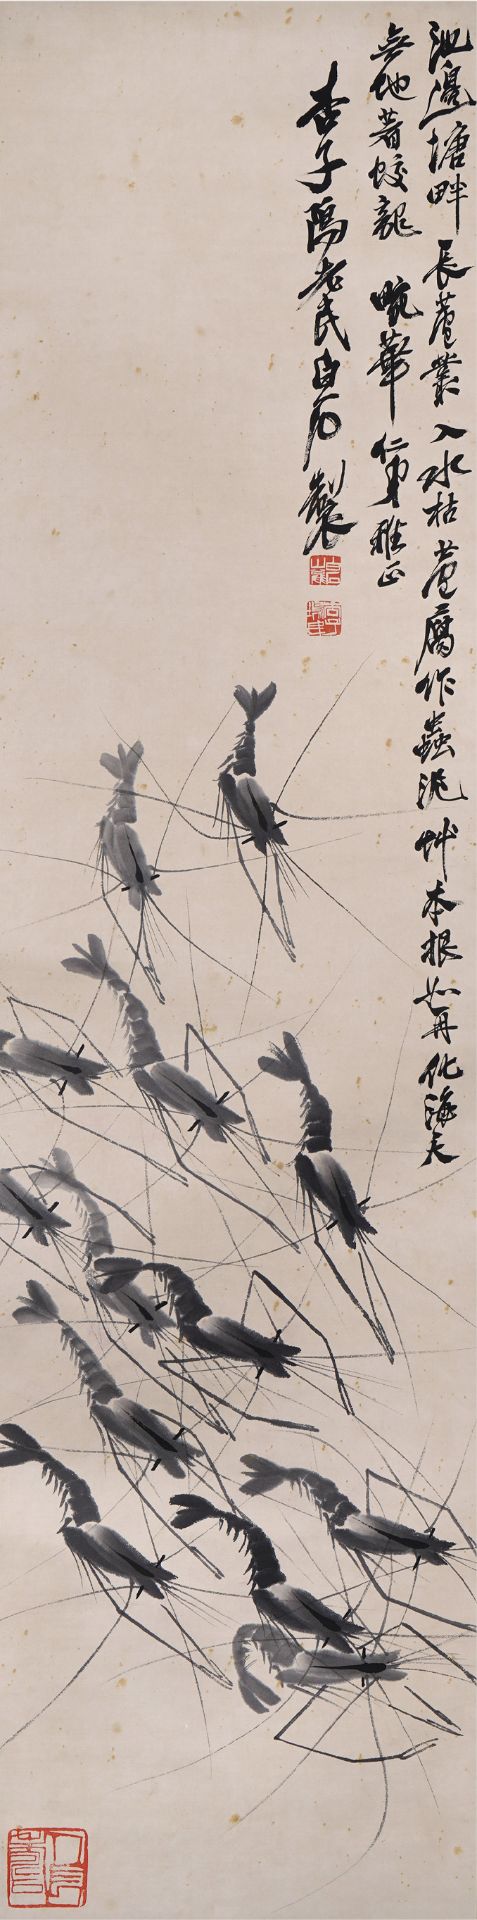 A Chinese Scroll Painting by Qi Baishi - Image 2 of 10